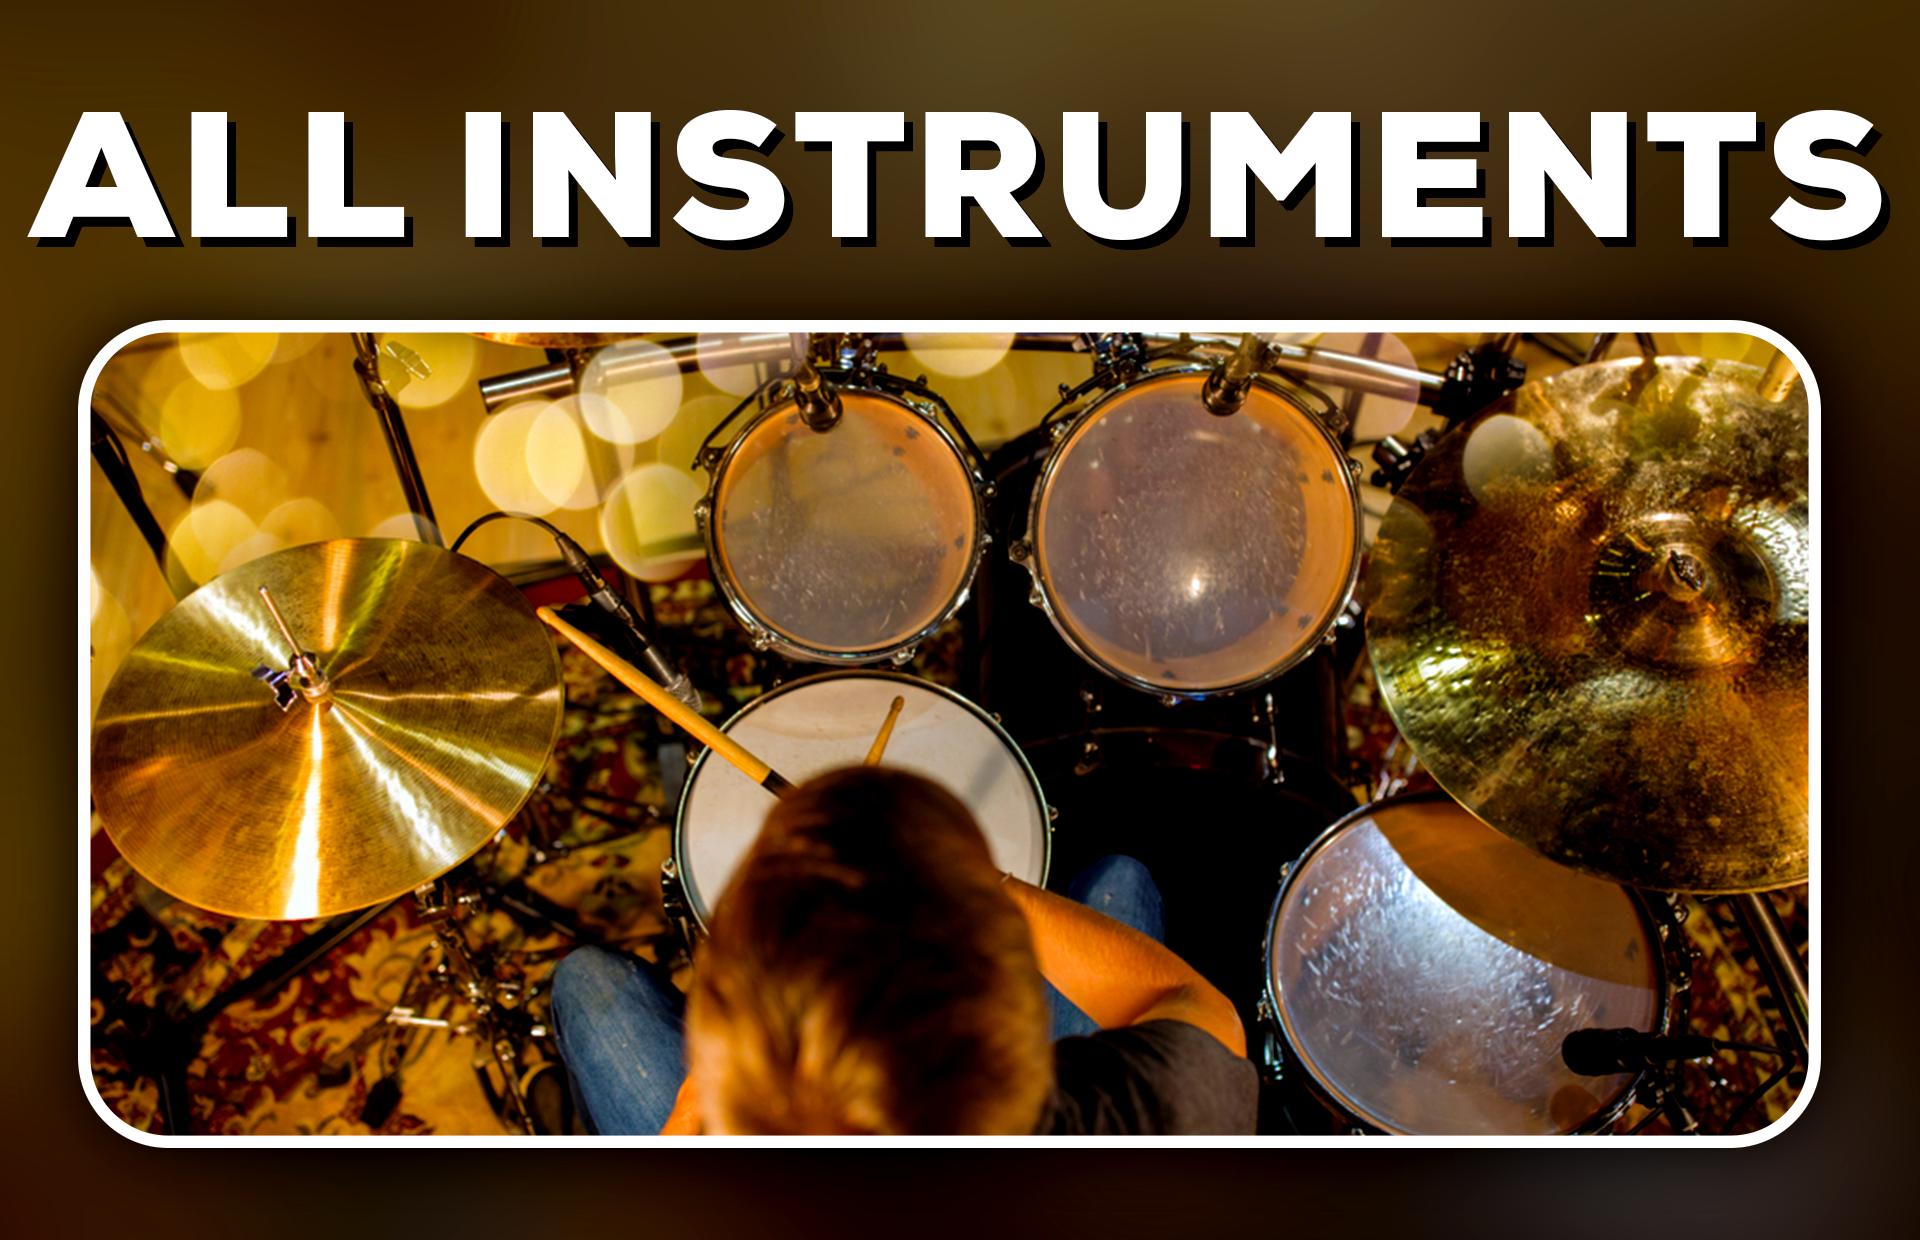 Drum Kit - Realistic Drum Pads for Android - APK Download